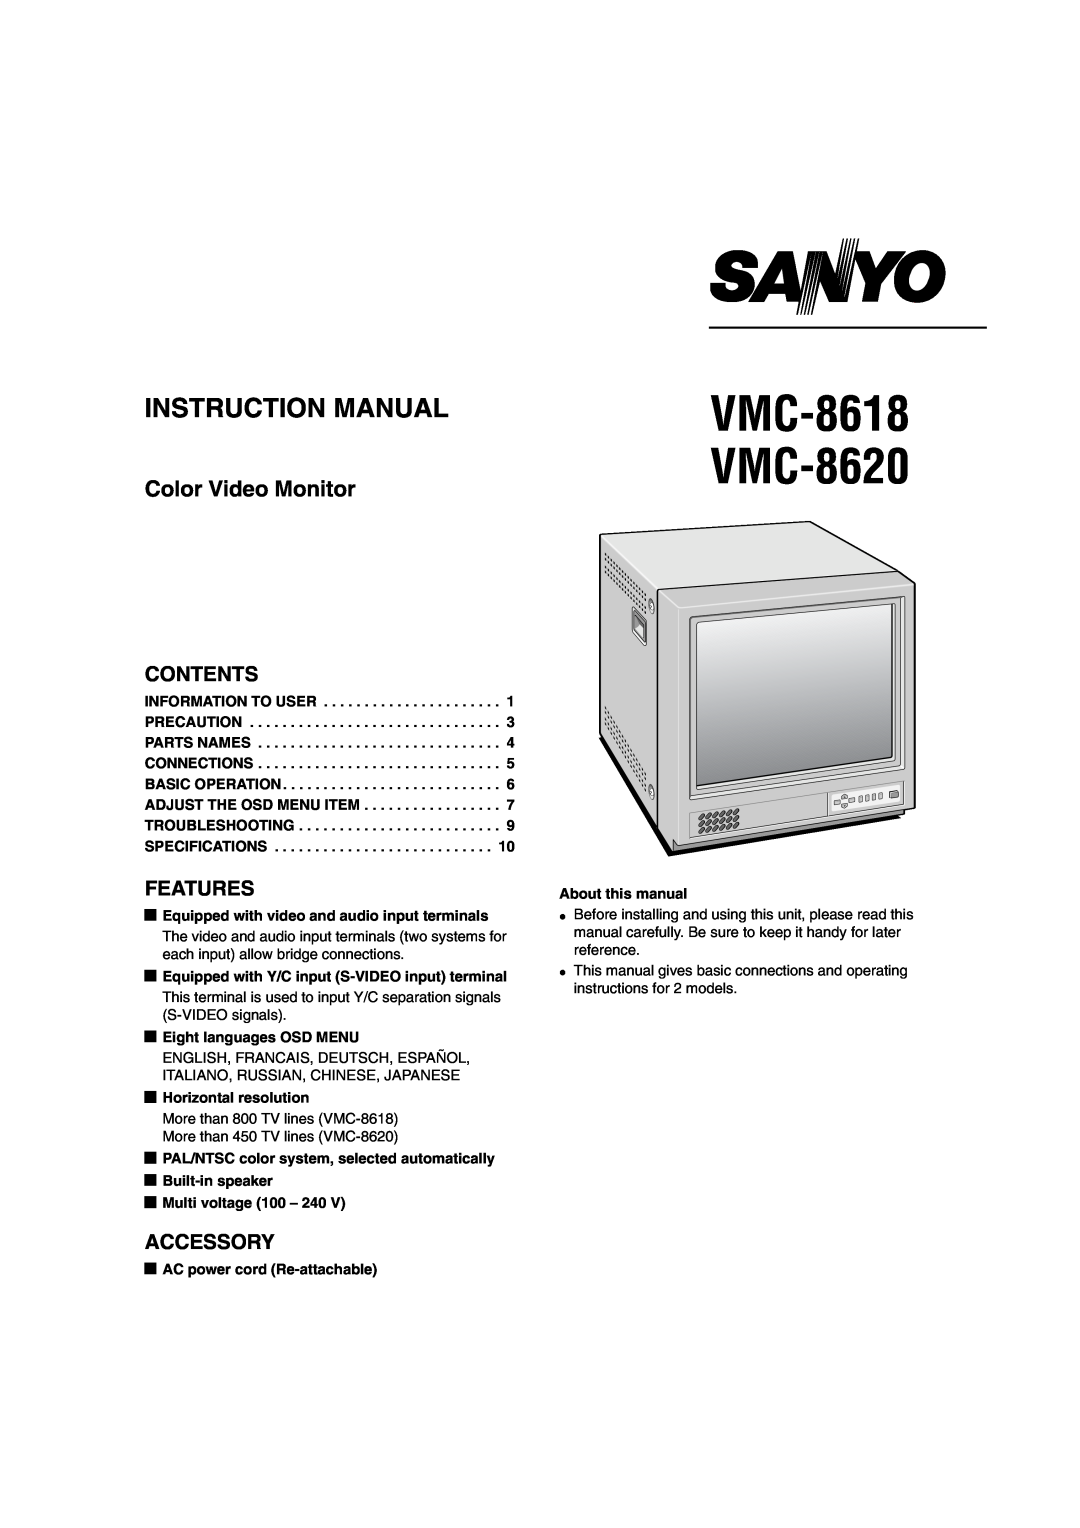 Sanyo VMC-8620 instruction manual Equipped with video and audio input terminals, Eight languages OSD MENU, Contents 